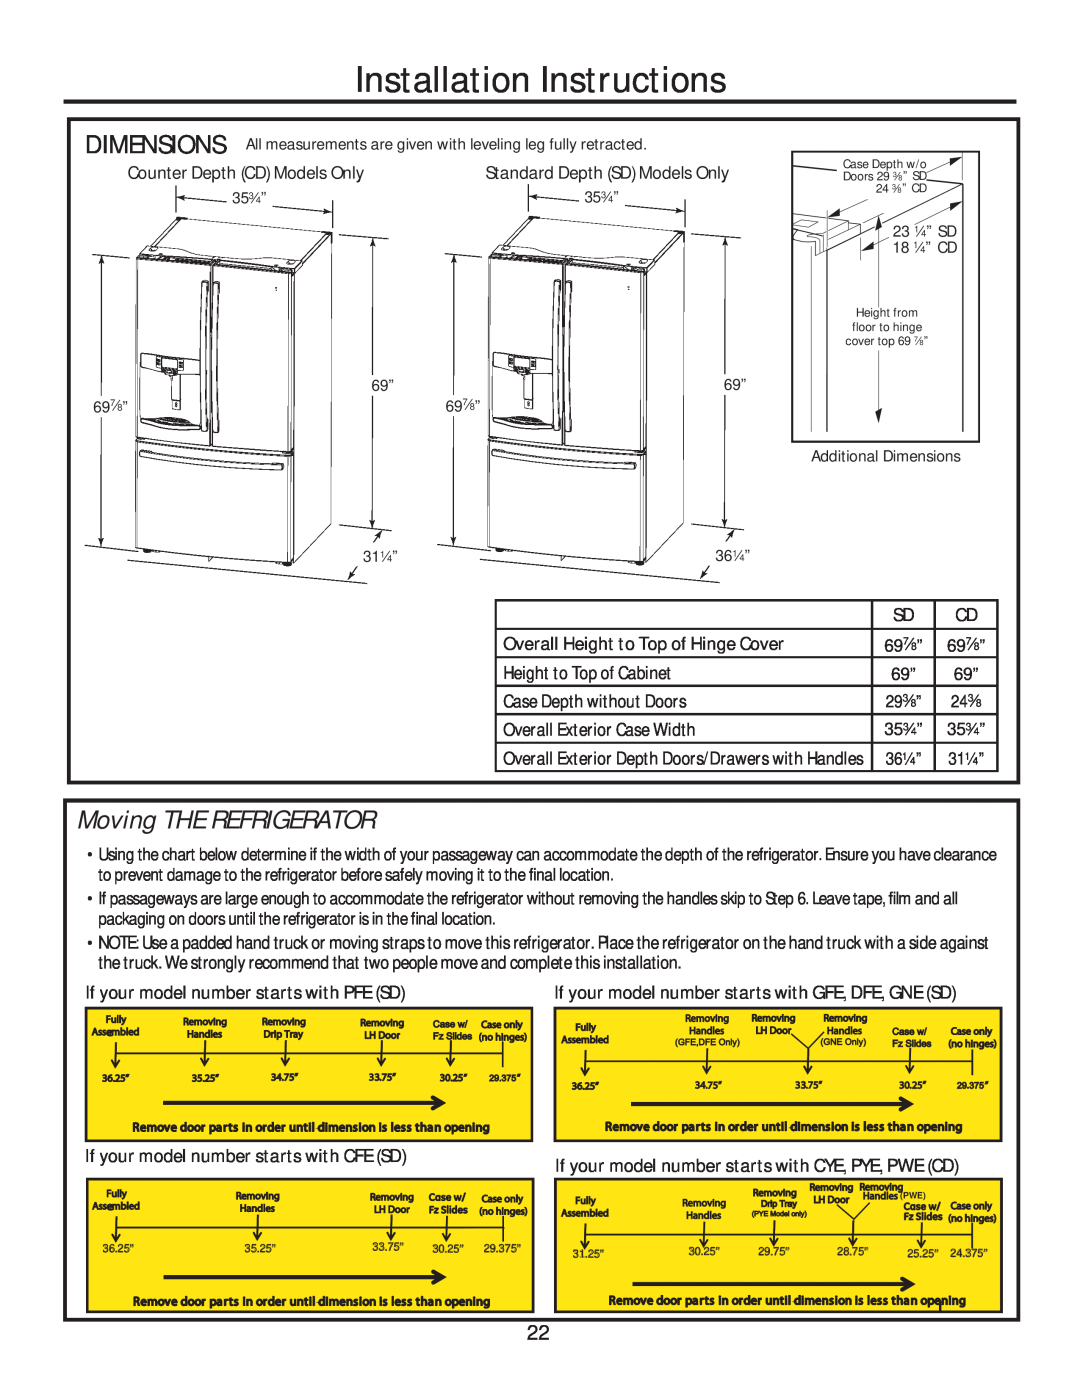 GE GFE28HMHES, GFE28HGHBB Installation Instructions, Moving THE REFRIGERATOR, Overall Height to Top of Hinge Cover 